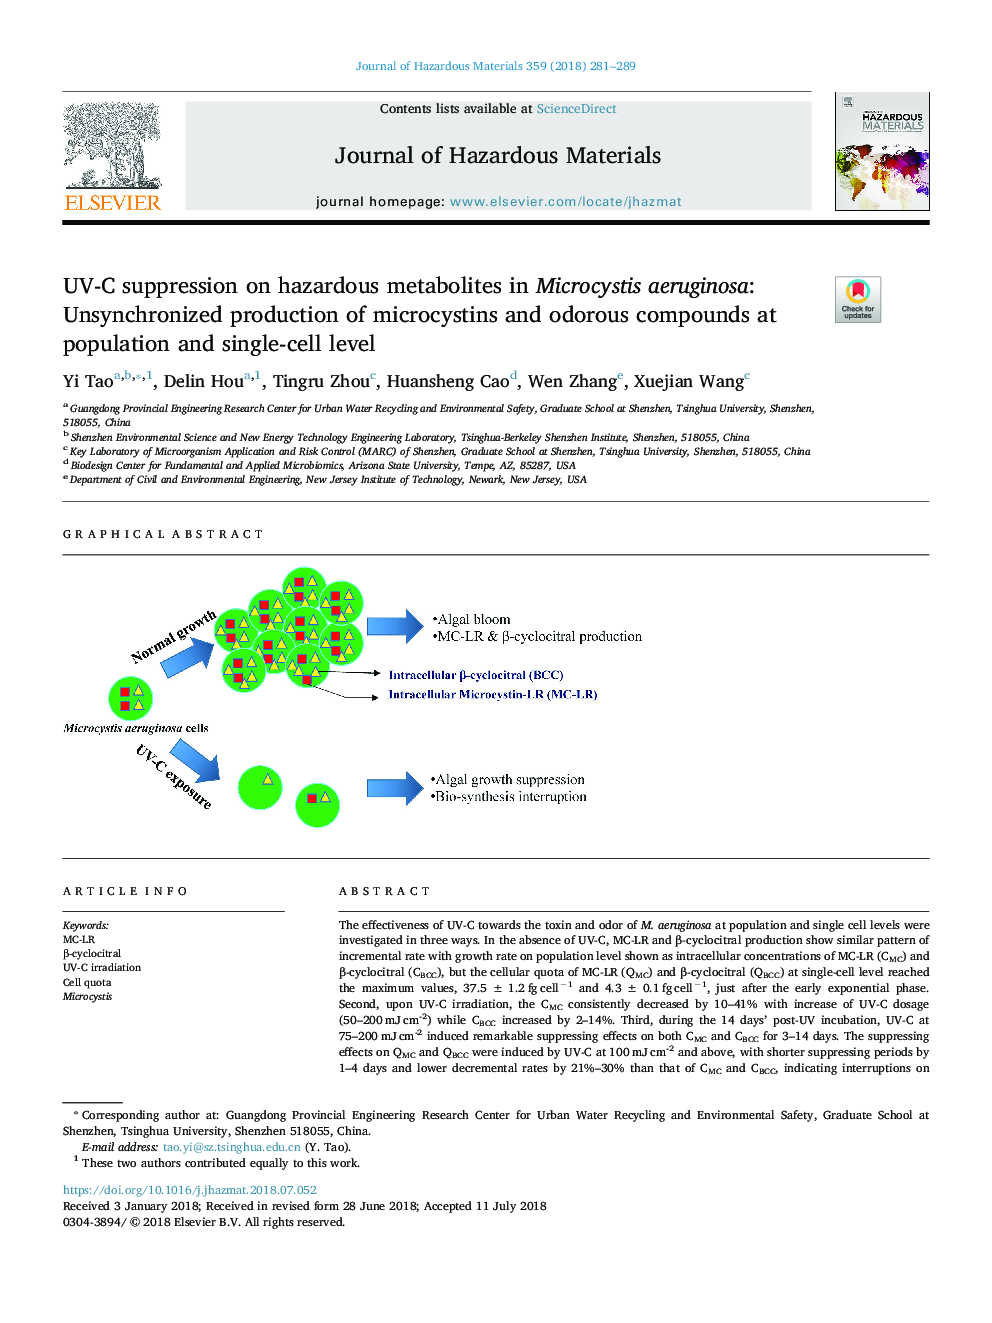 UV-C suppression on hazardous metabolites in Microcystis aeruginosa: Unsynchronized production of microcystins and odorous compounds at population and single-cell level